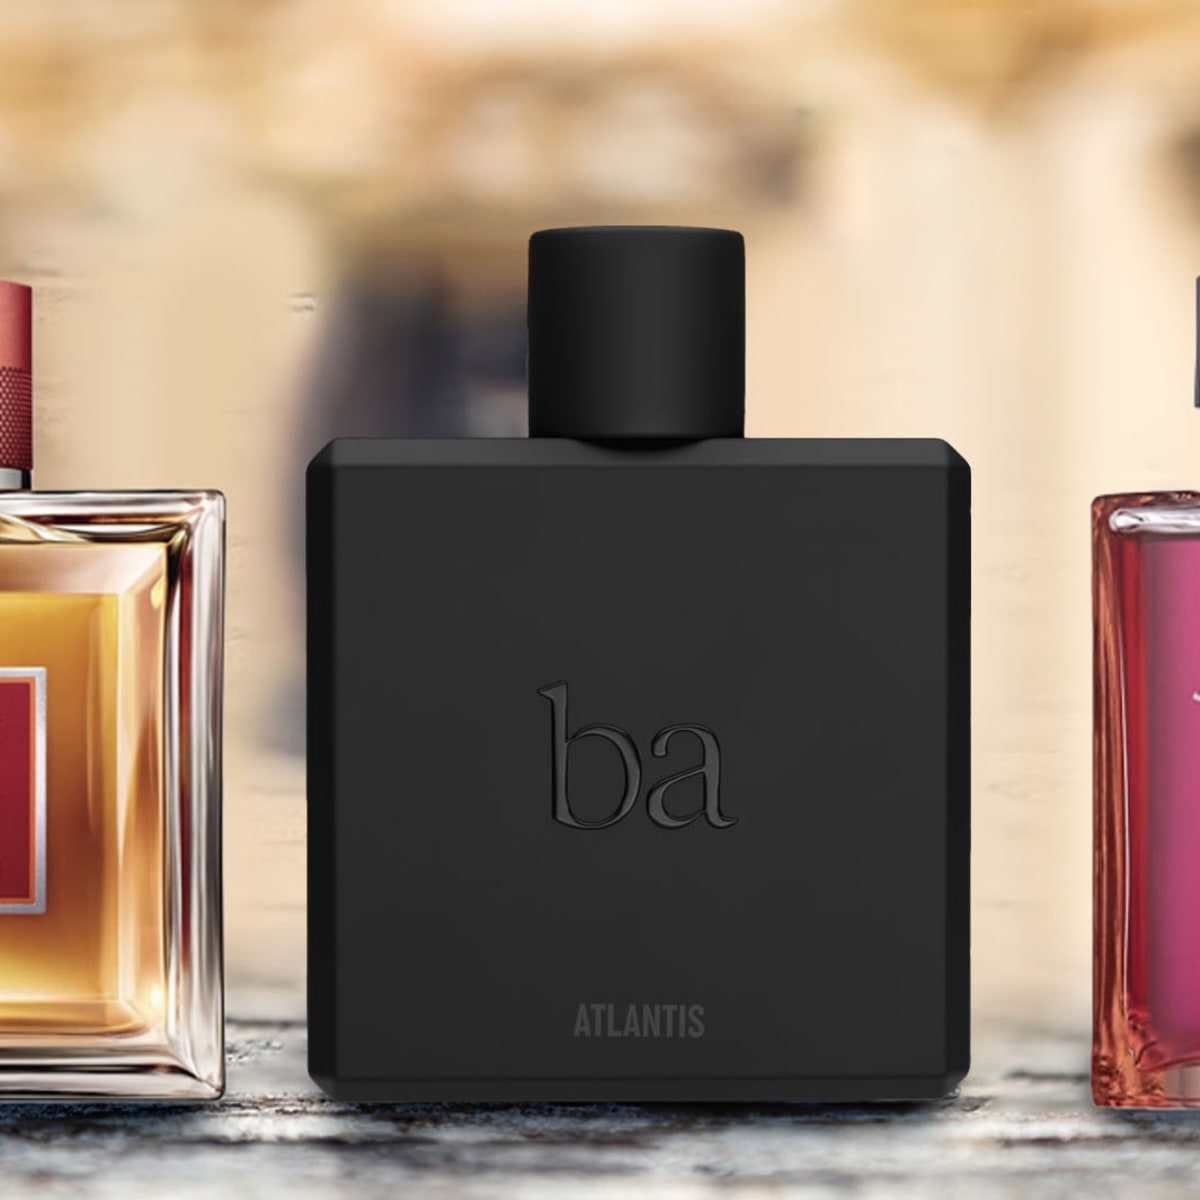 Masculine Perfumes Collection for Perfumes